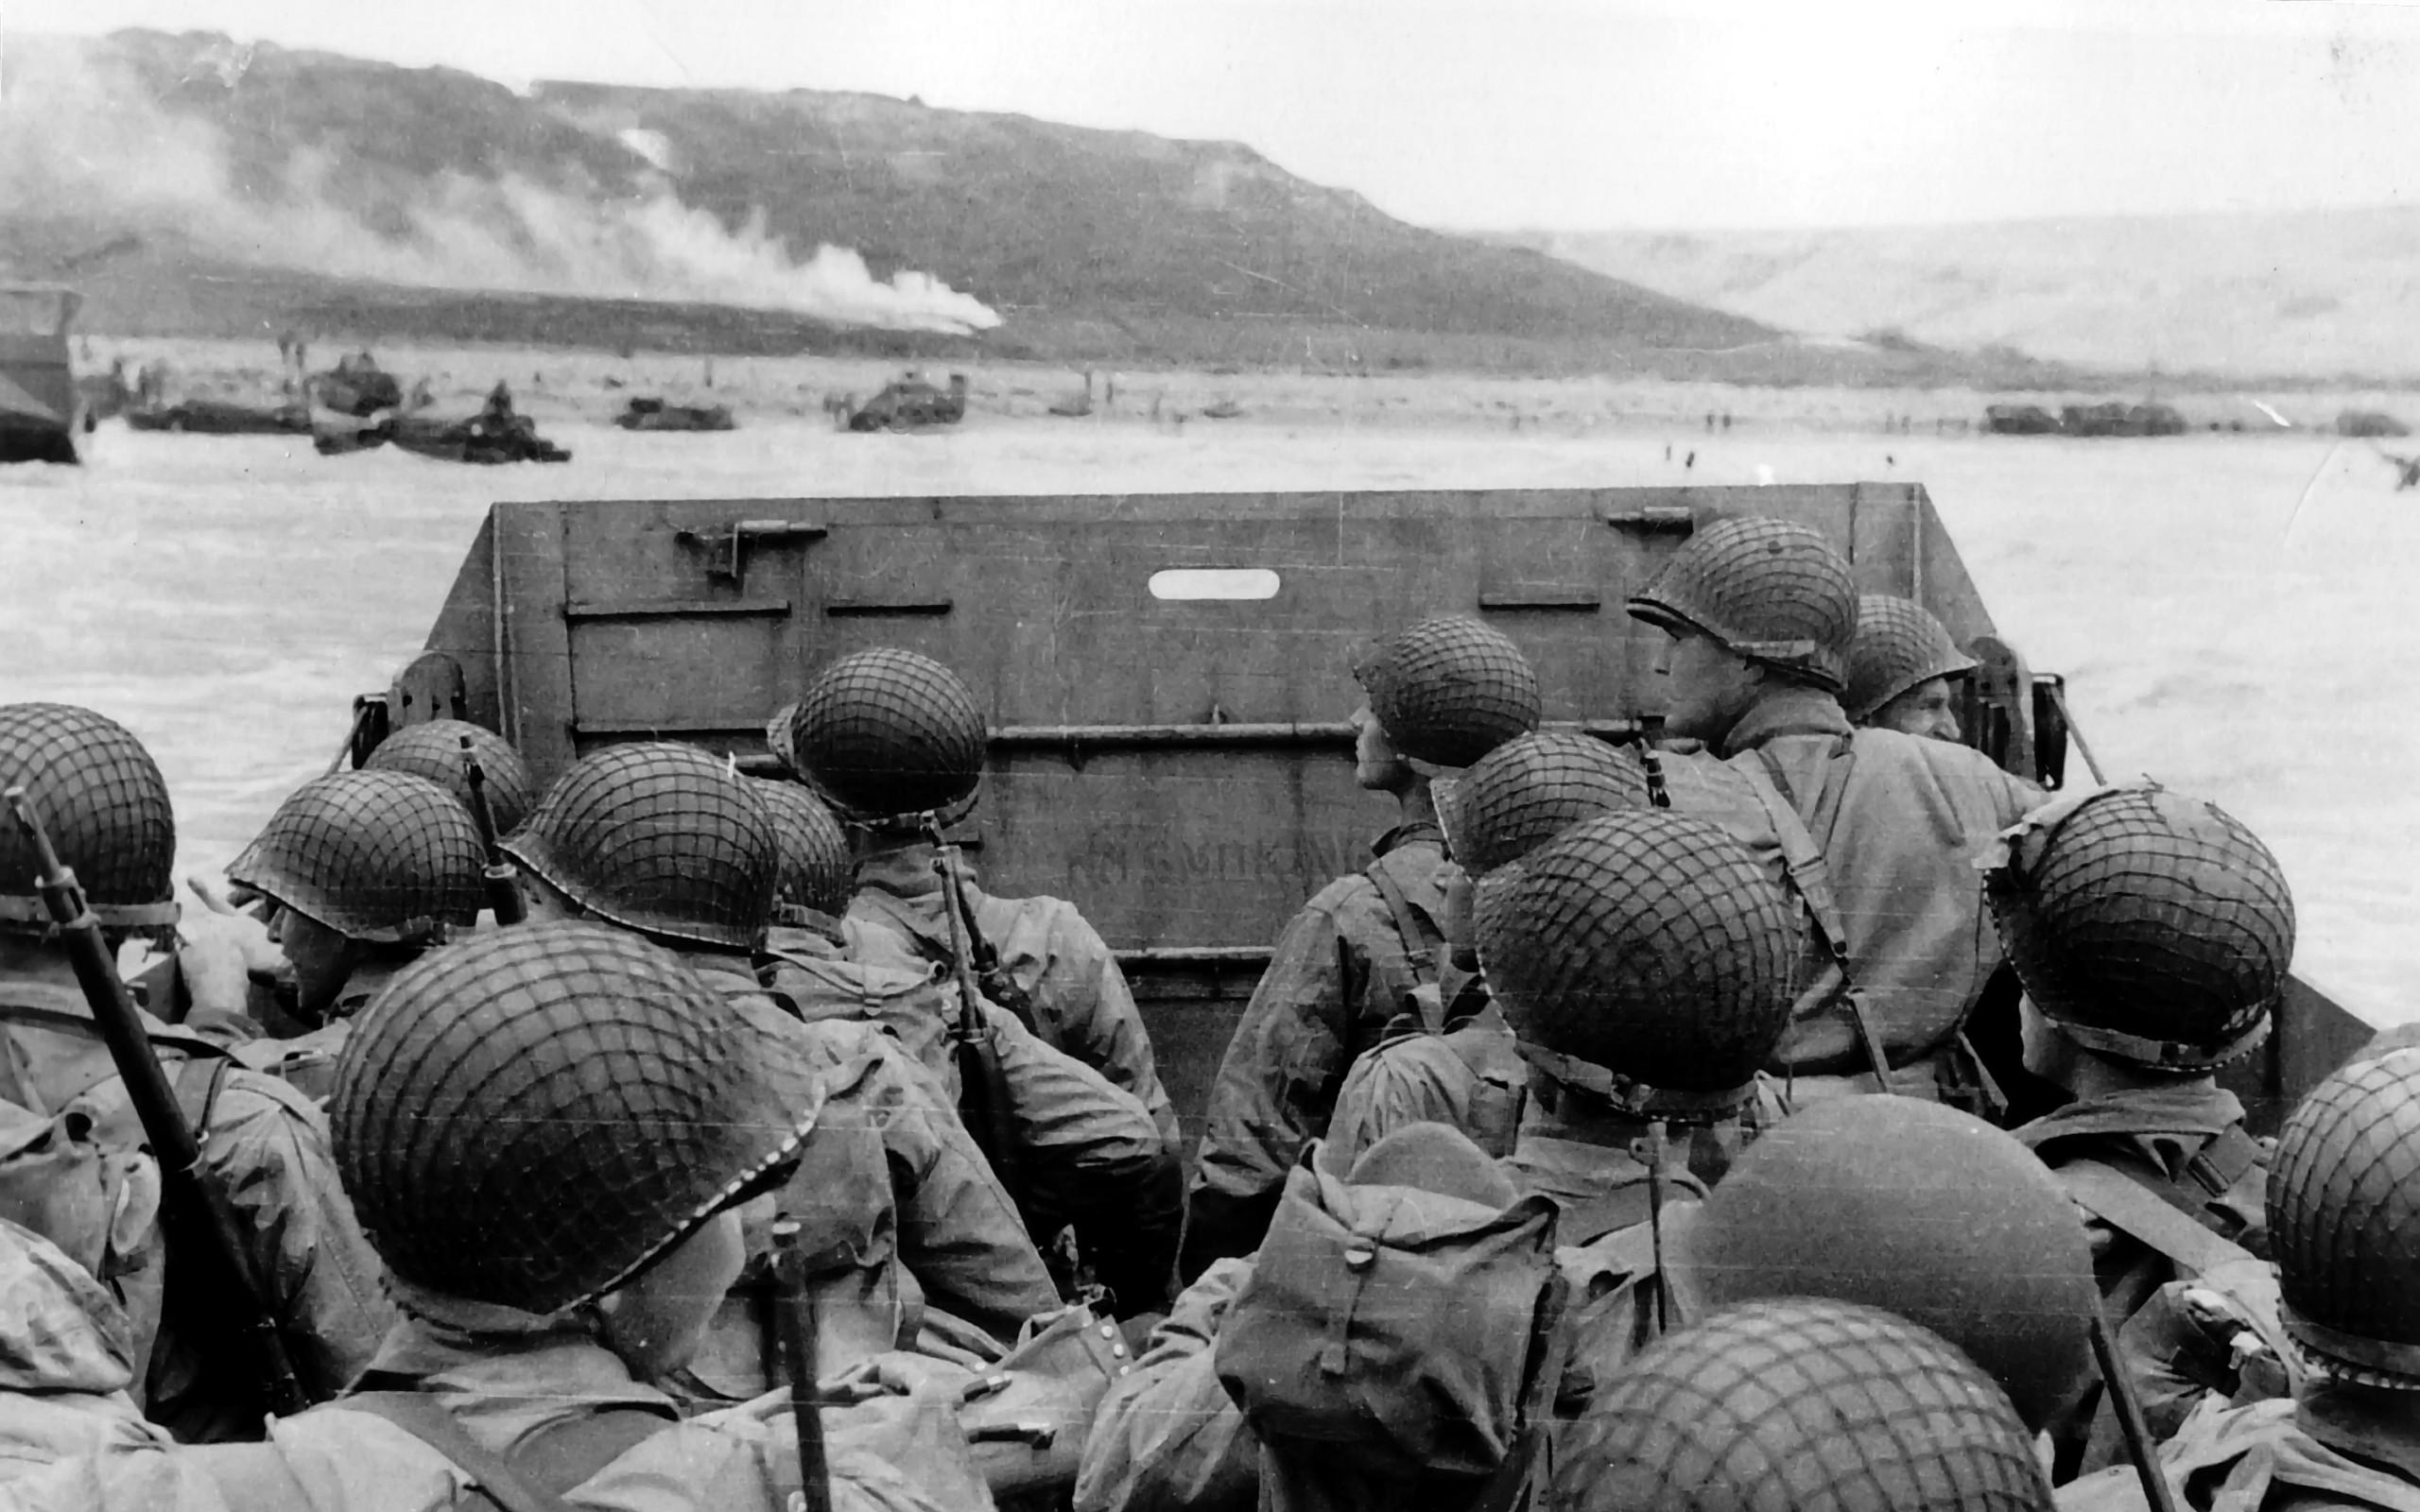 Soldiers, Beach, Normandy, Military, Grayscale, World War II, D Day